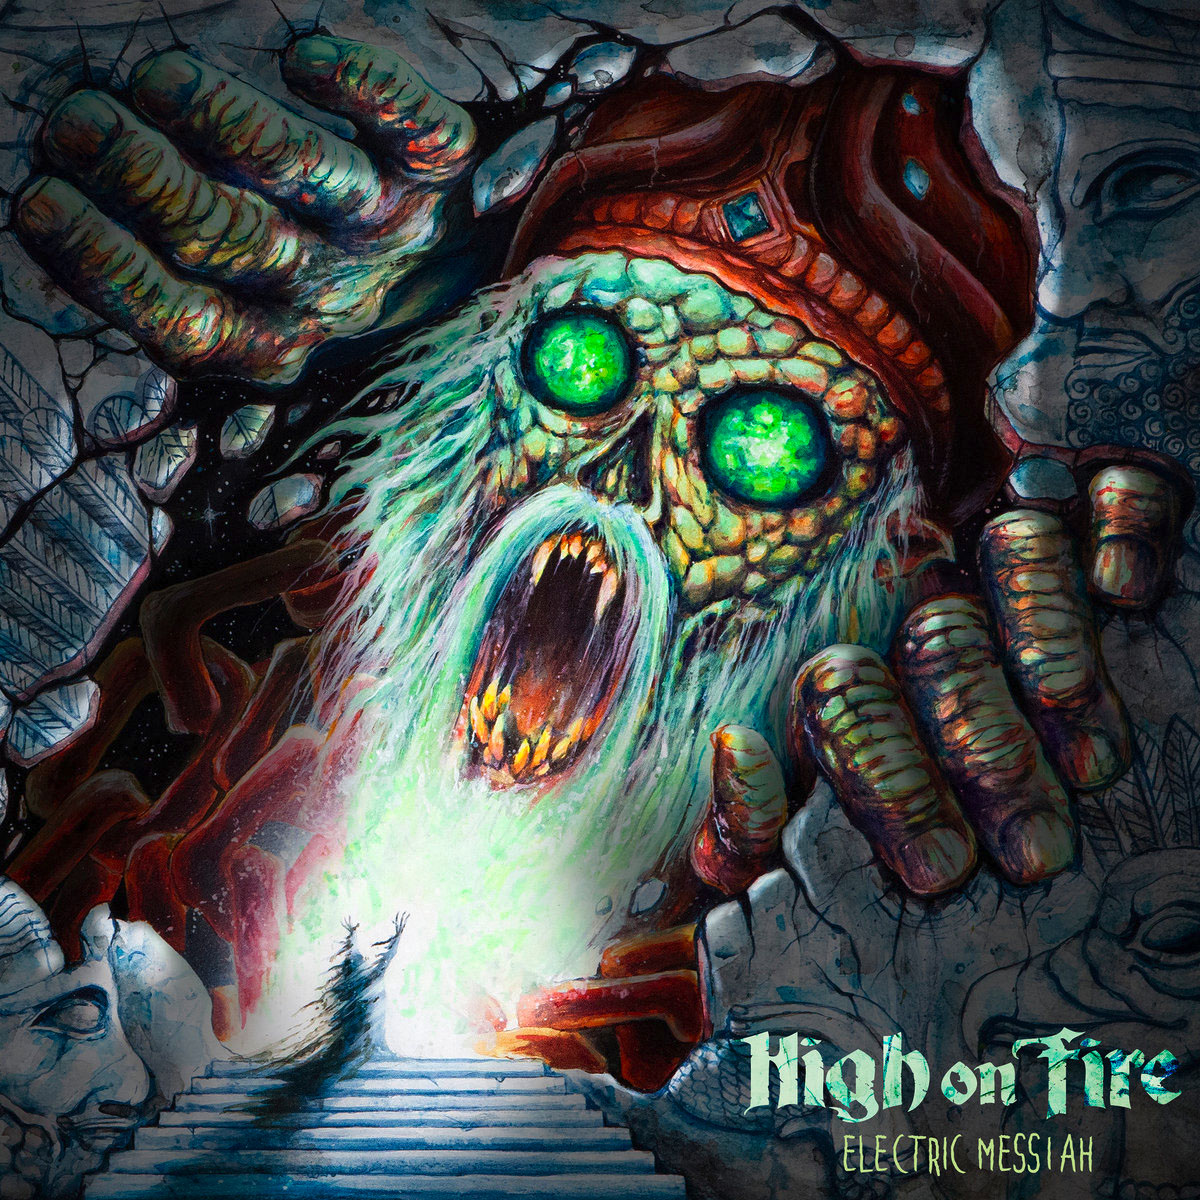 Electric Messiah by High On Fire